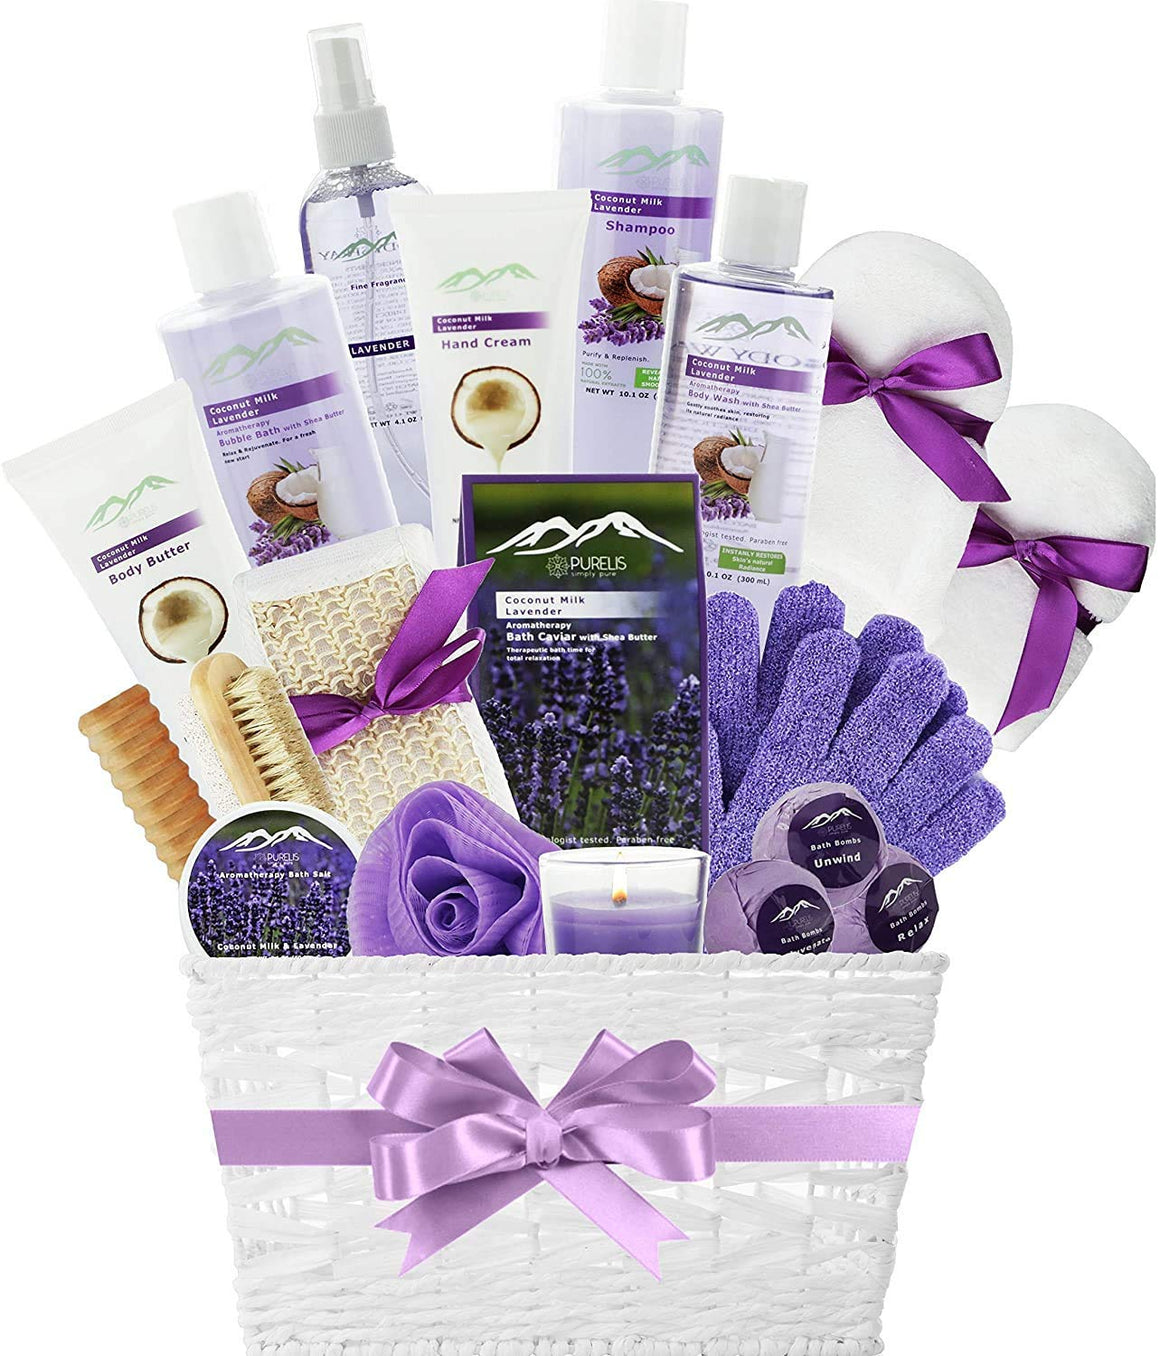 Pampering Good Vibes Gift Basket for Teens, Women 7pcs Get Well Soon Gifts  for Women. Self Care Gift Set with Mug, Shower Gel, Soap, Bubble Bath, Body